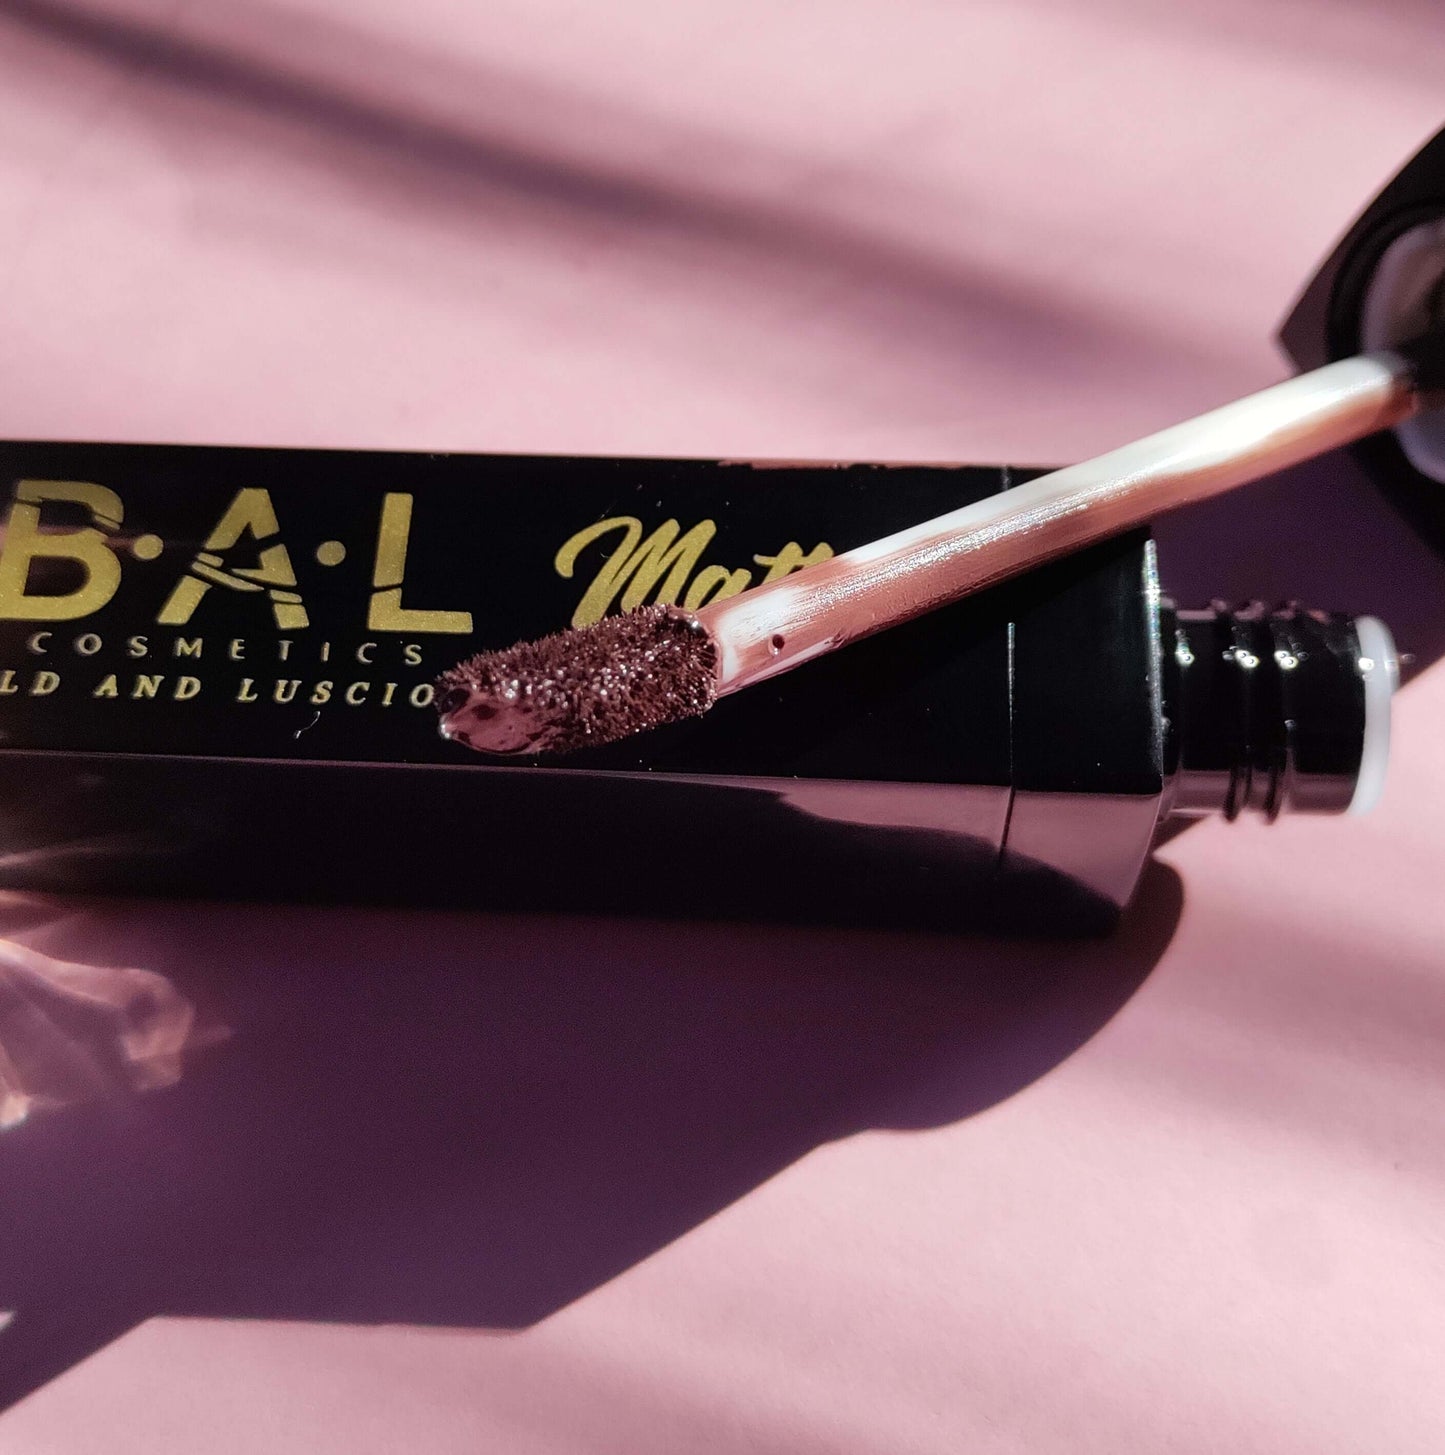 Close up of the wand for color cooca which is our creamiest richest chocolate brown color. The wand of the liquid lipstick is resting on the black bottle with the Bold and Luscious Cosmetics Label visible. 